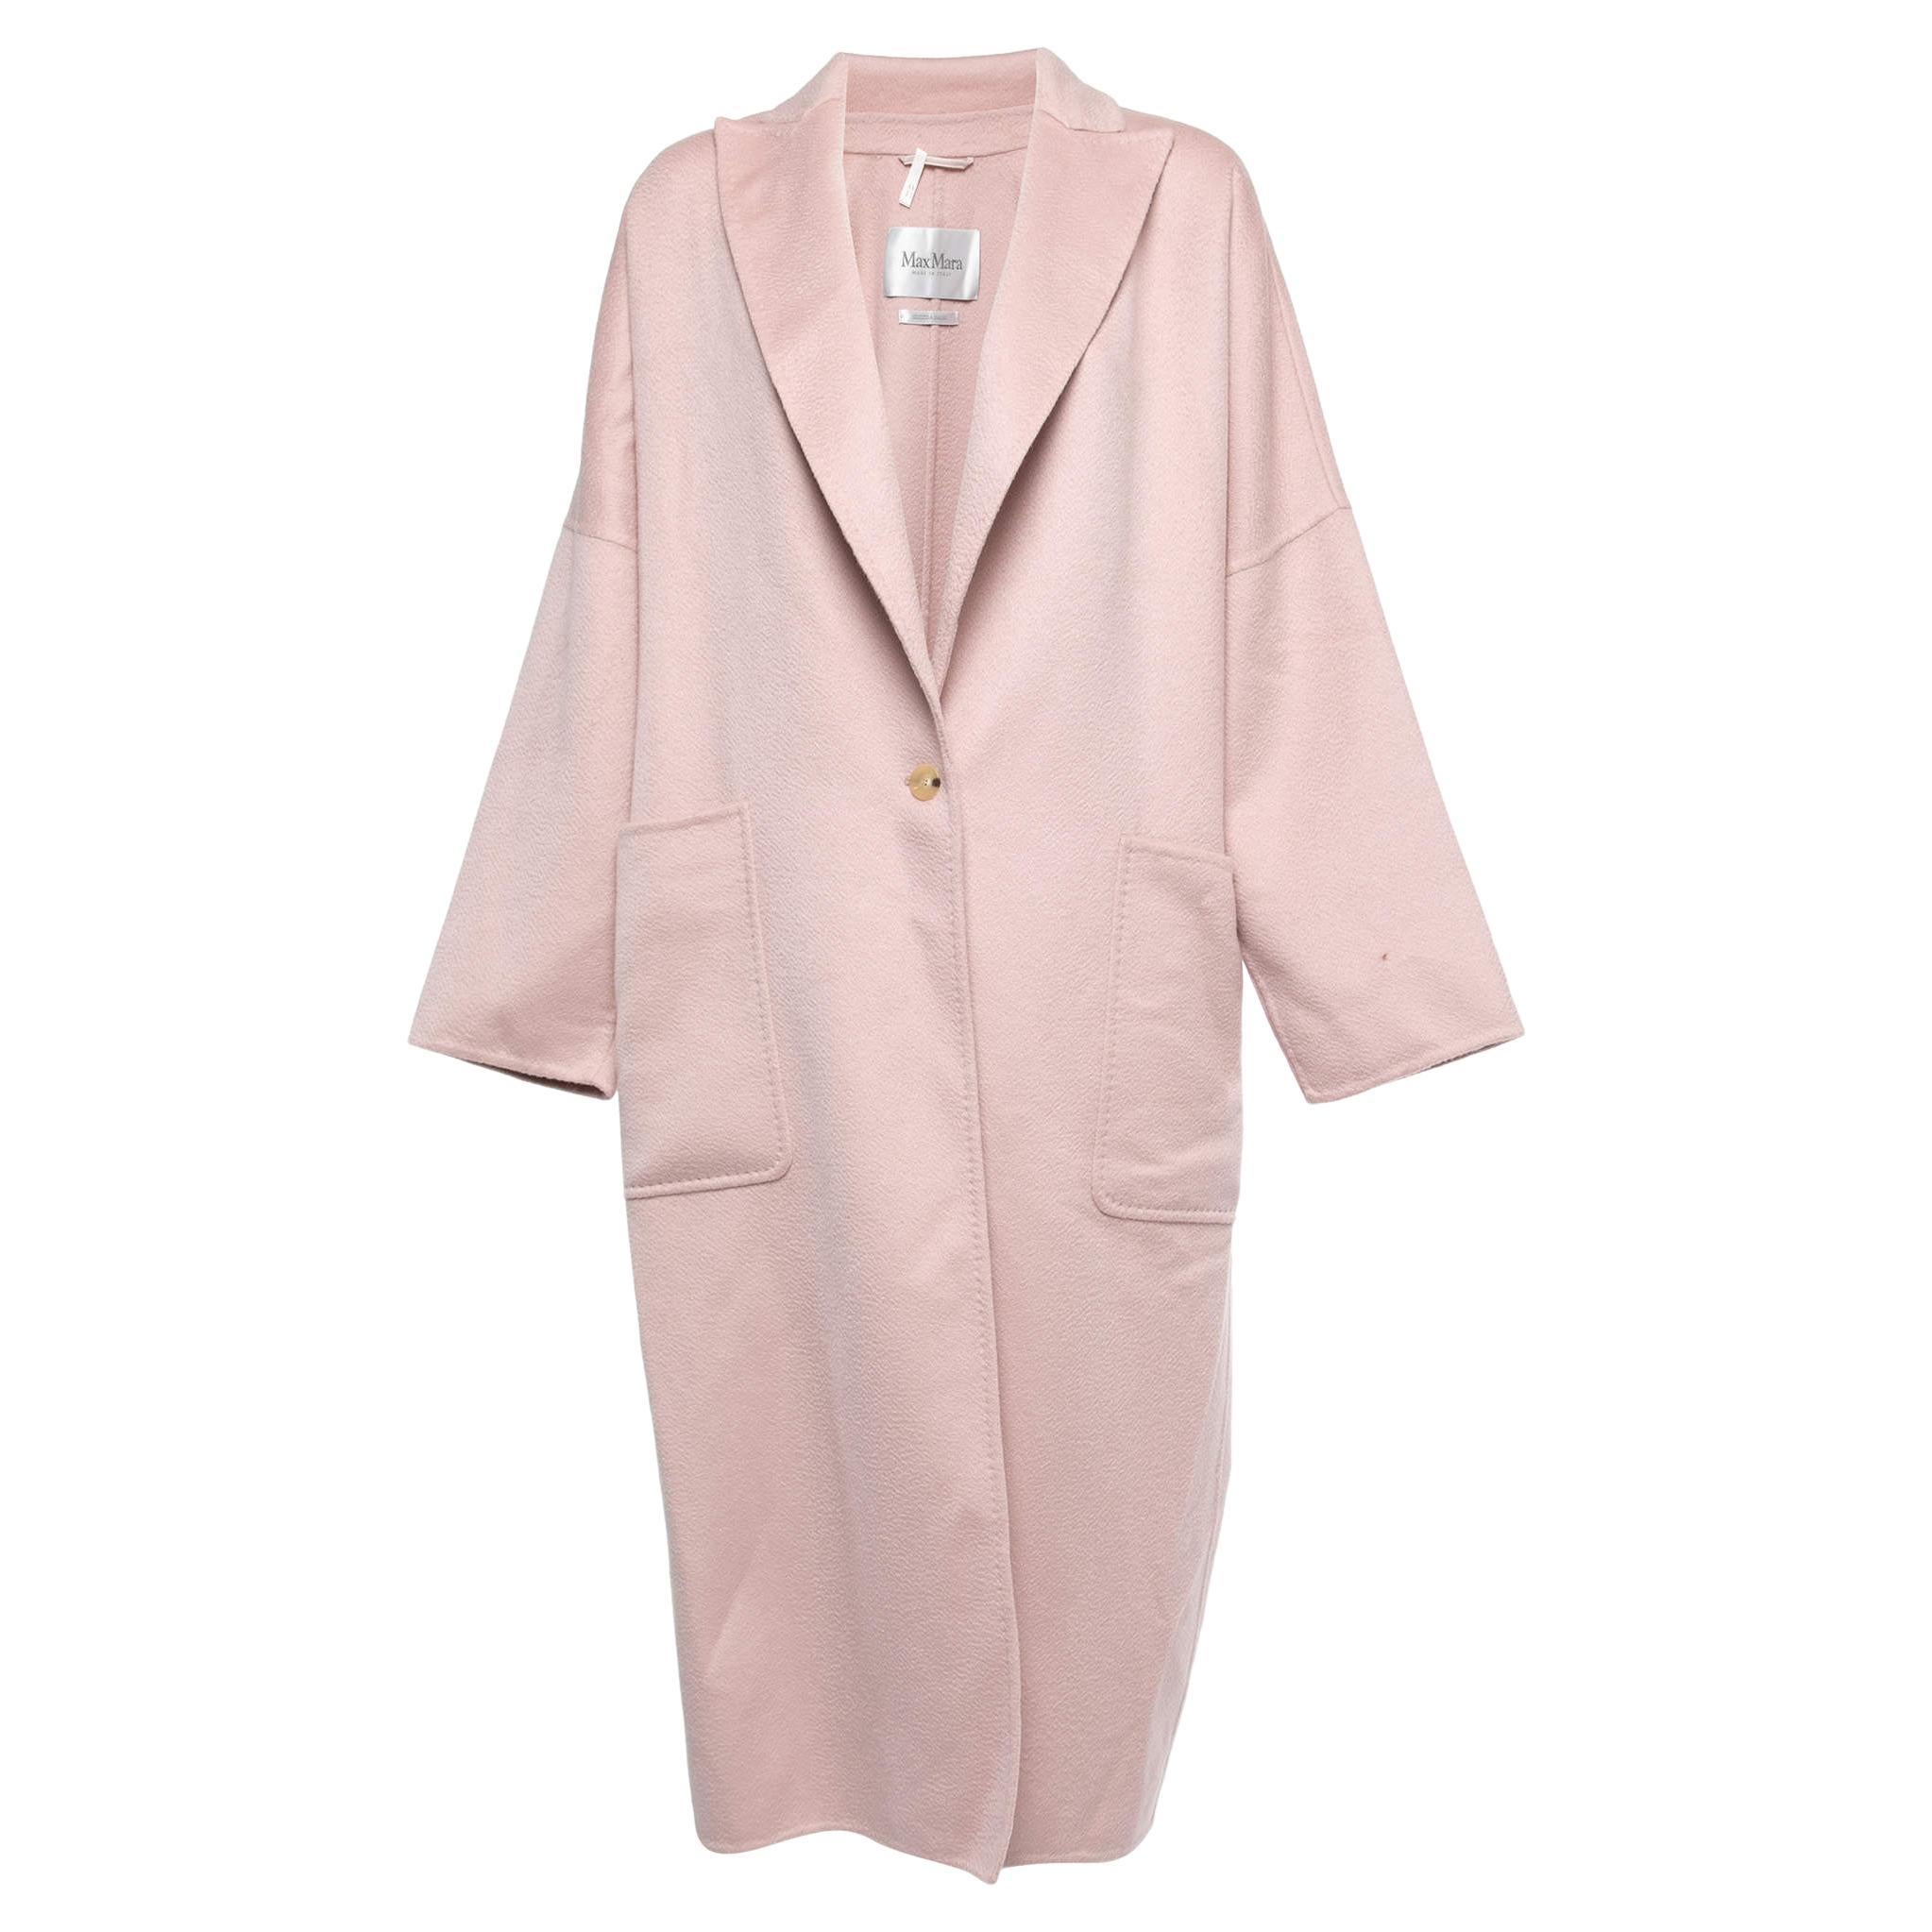 Max Mara Light Pink Cashmere Single Breasted Long Coat M